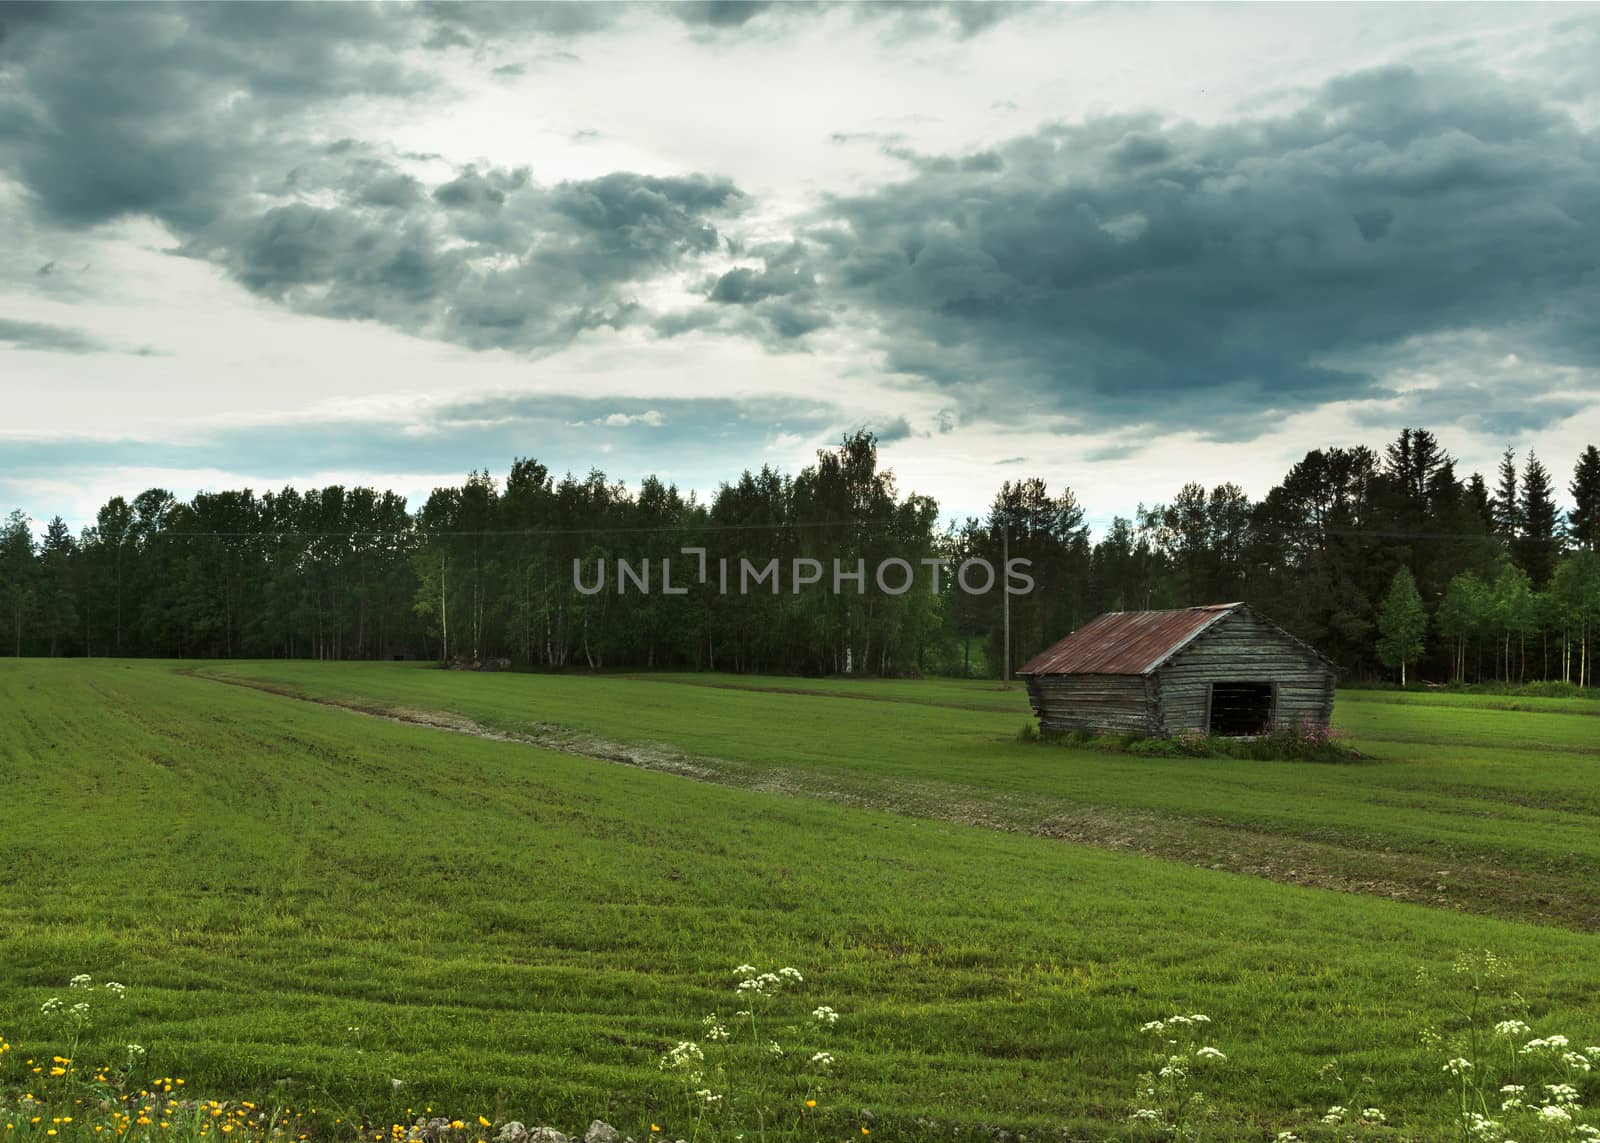 Angry sky rolls in over green field with wooden barn and forest as background.